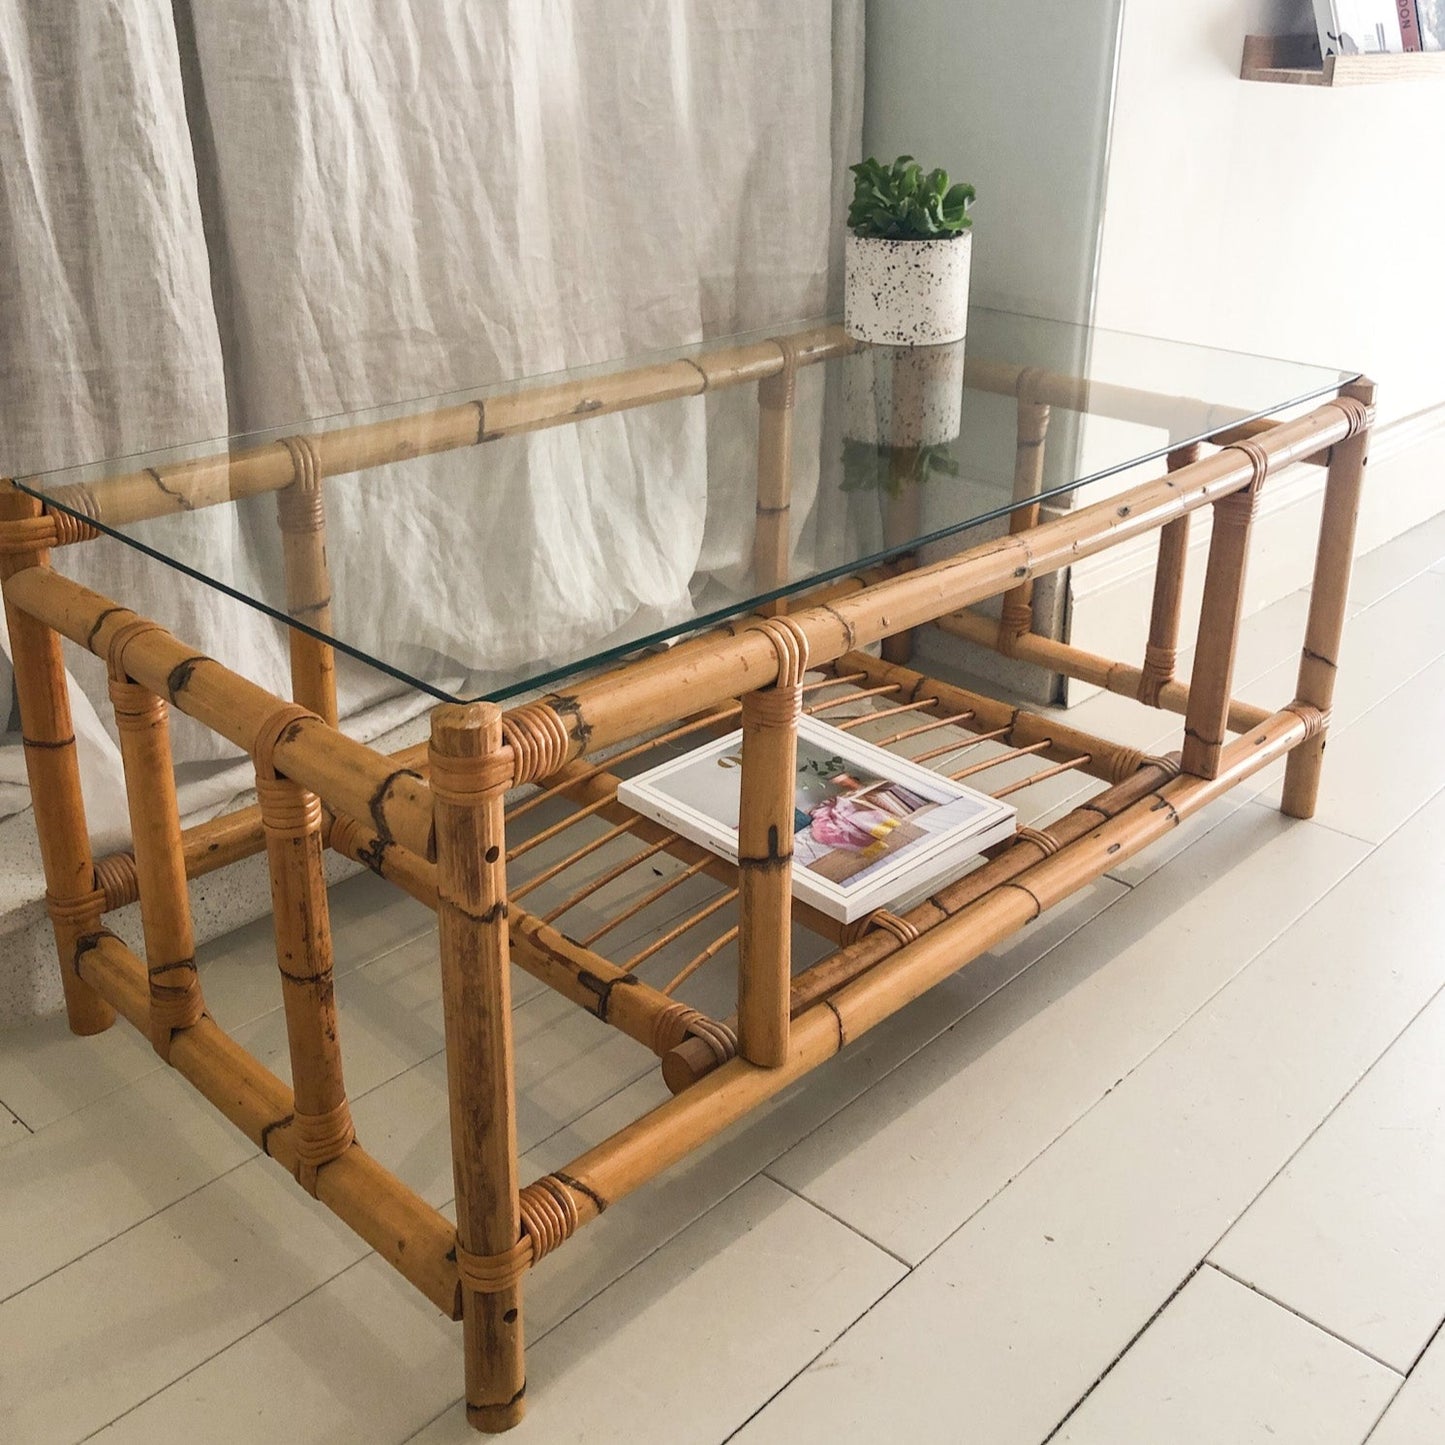 Vintage Glass & Bamboo Coffee Table with Shelf